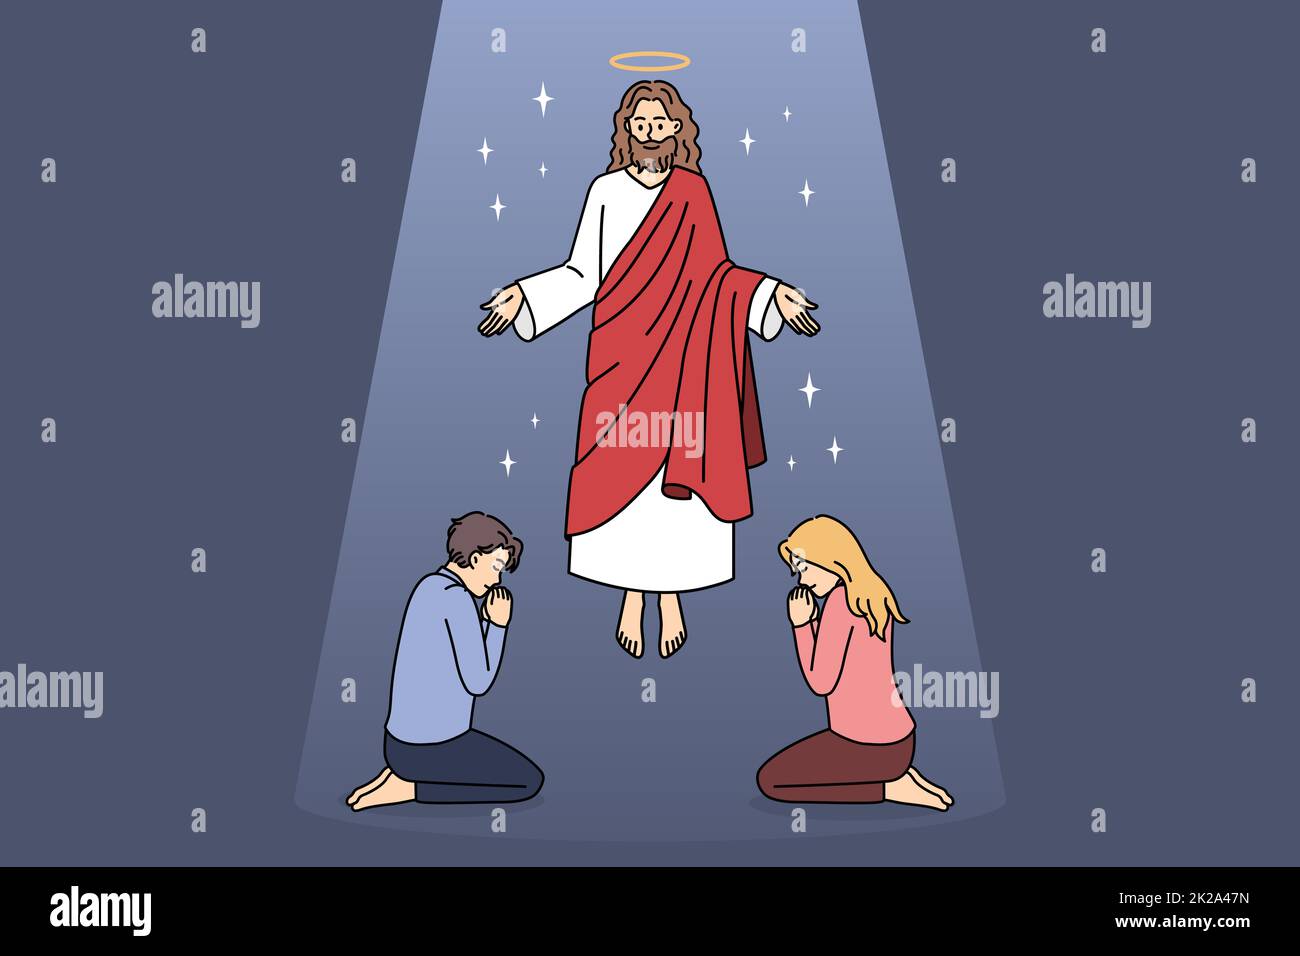 Religion and Christianity education concept. Stock Photo